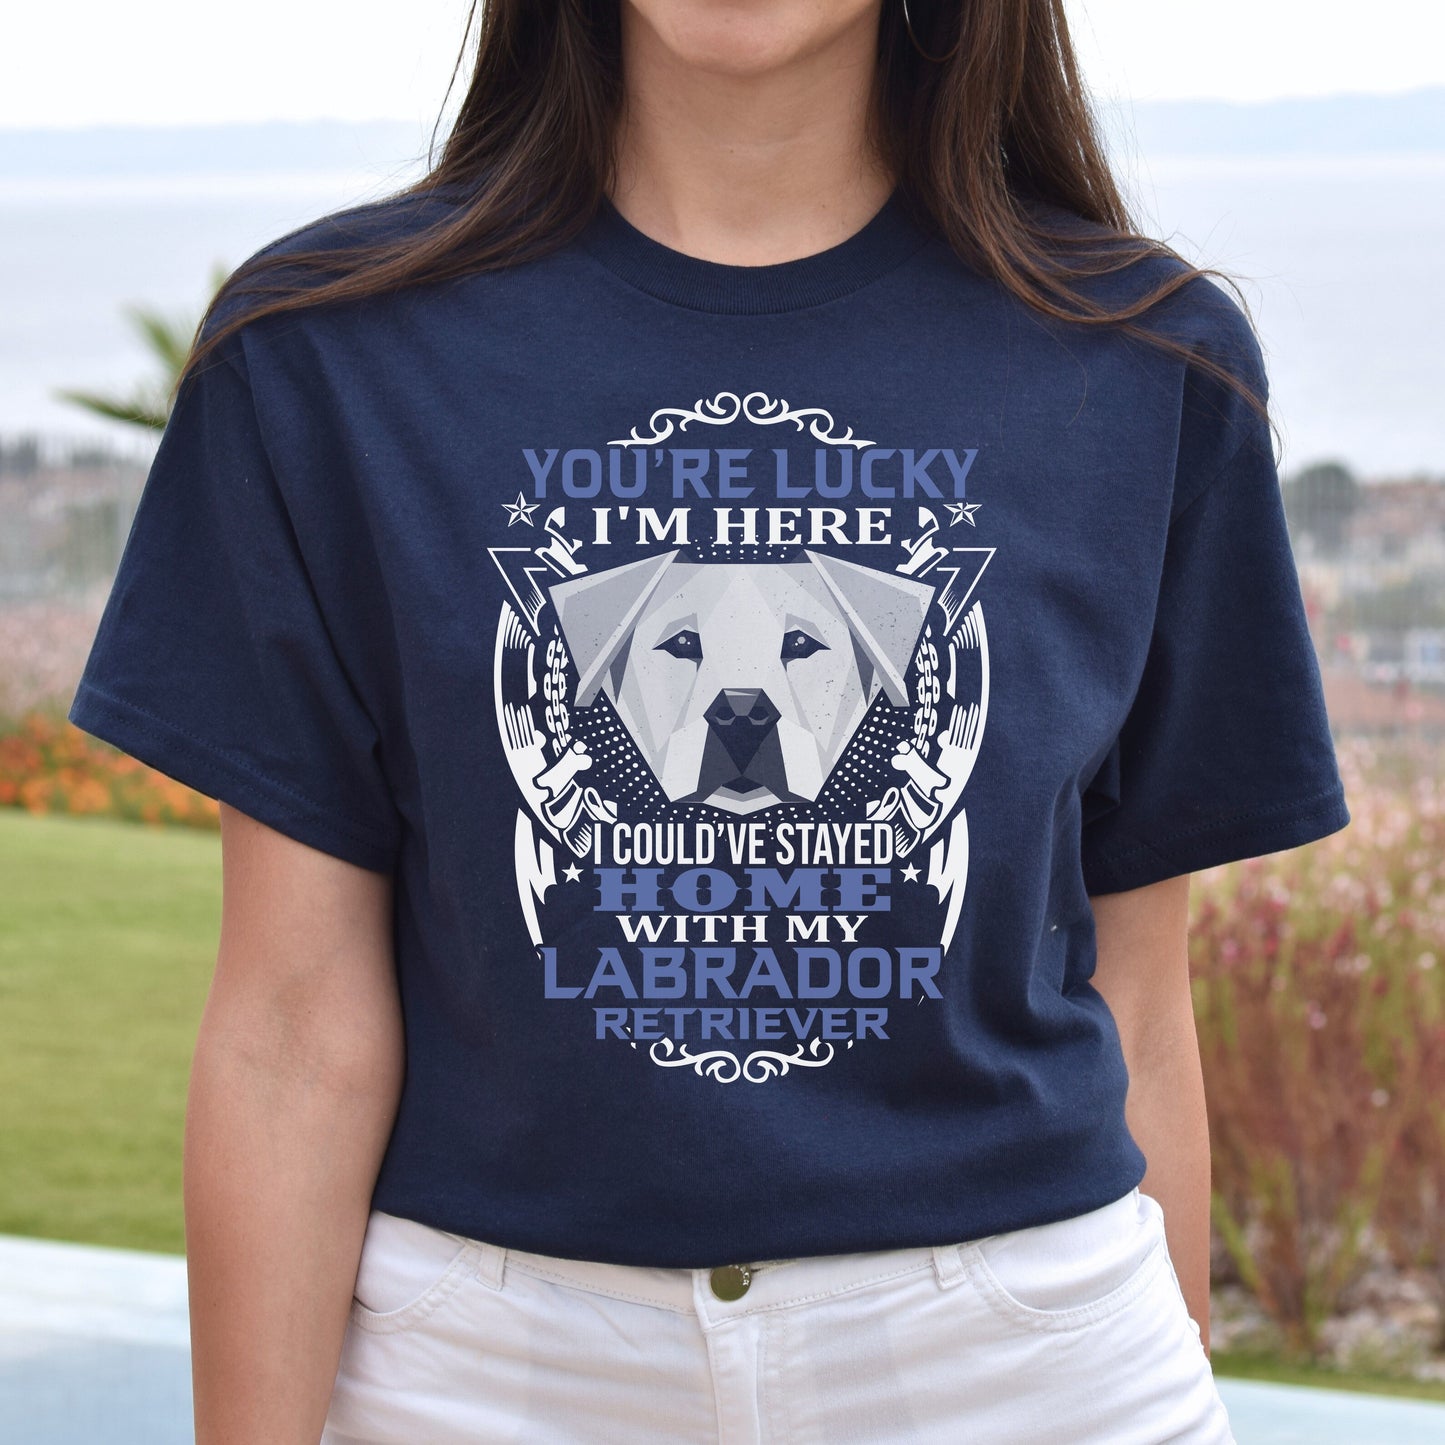 You are lucky I'm here - Labrador retriever owner Unisex t-shirt gift-Navy-Family-Gift-Planet